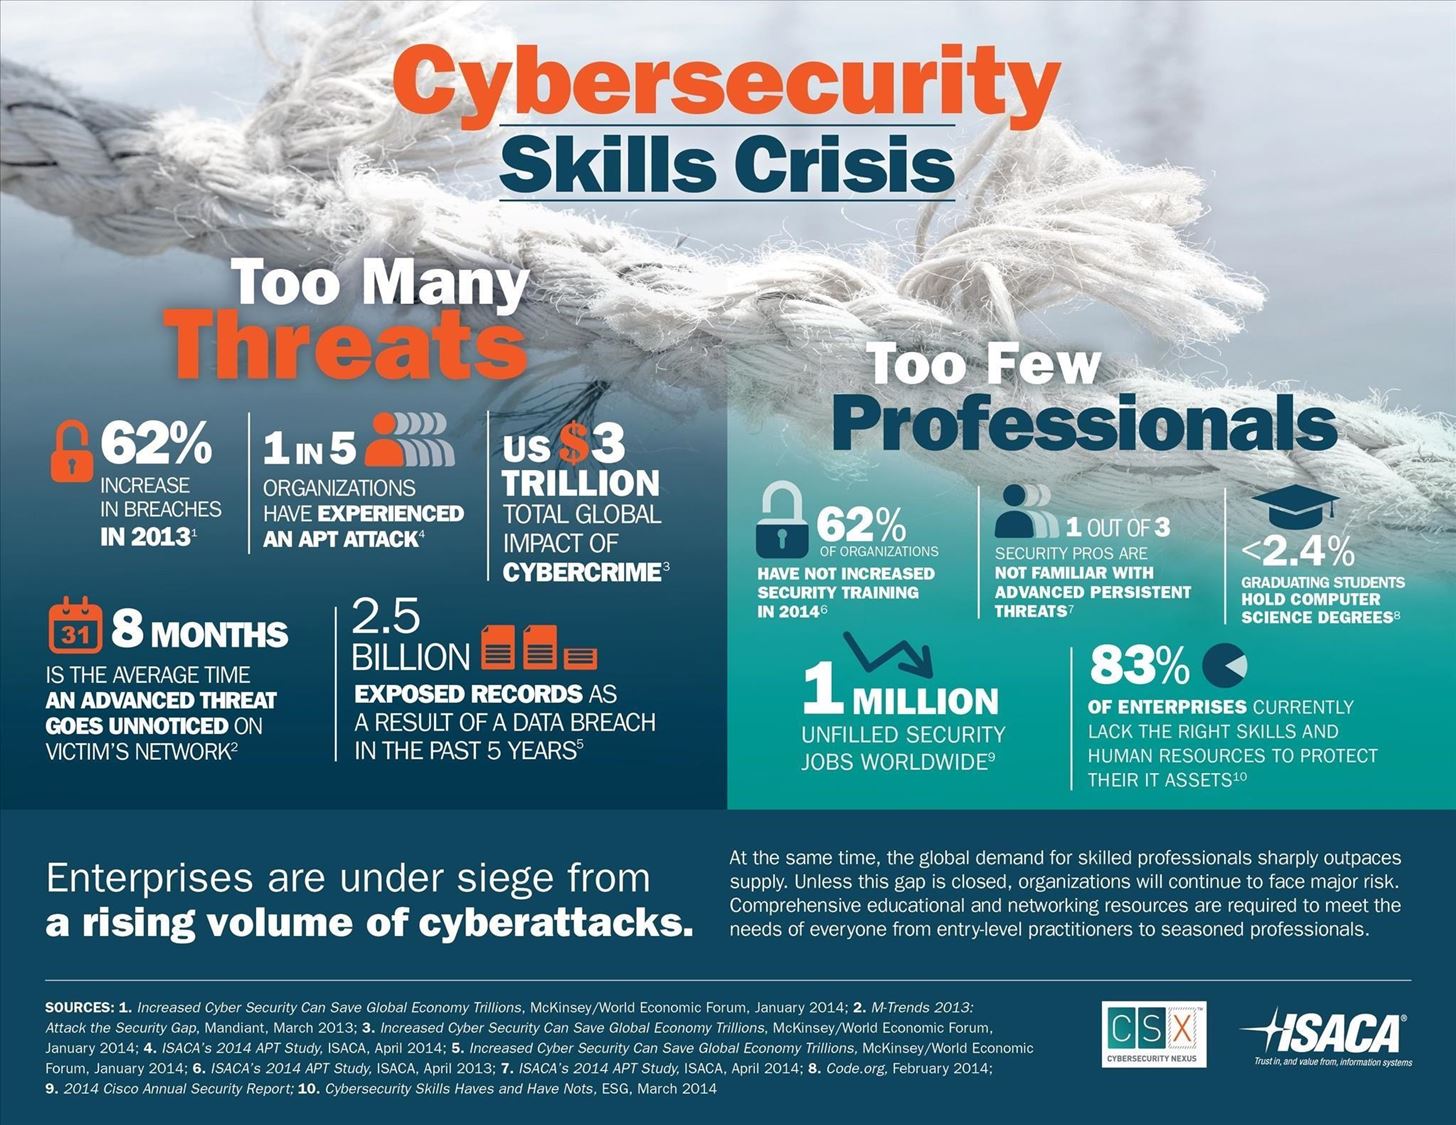 Jobs & Salaries in Cyber Security Are Exploding!